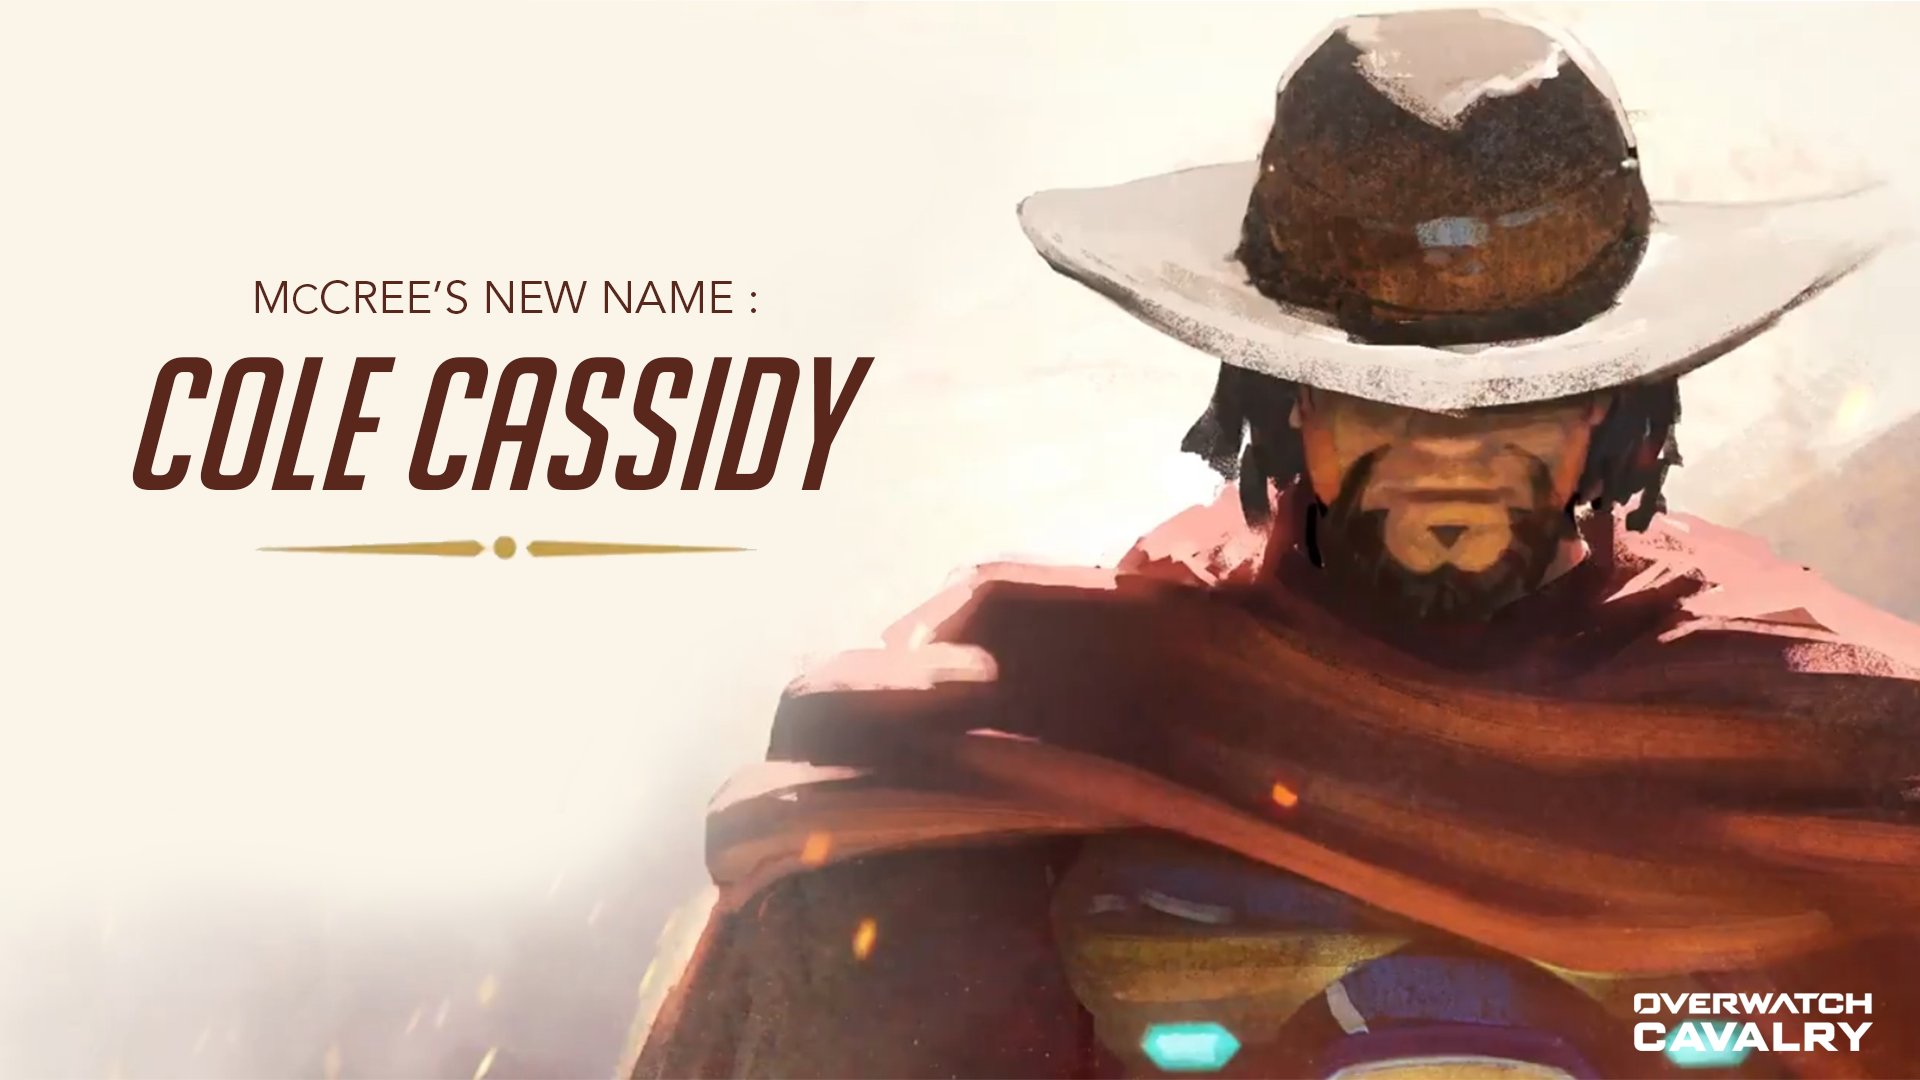 Overwatch Cavalry no Twitter: McCree renamed to Cole Cassidy #Overwatch